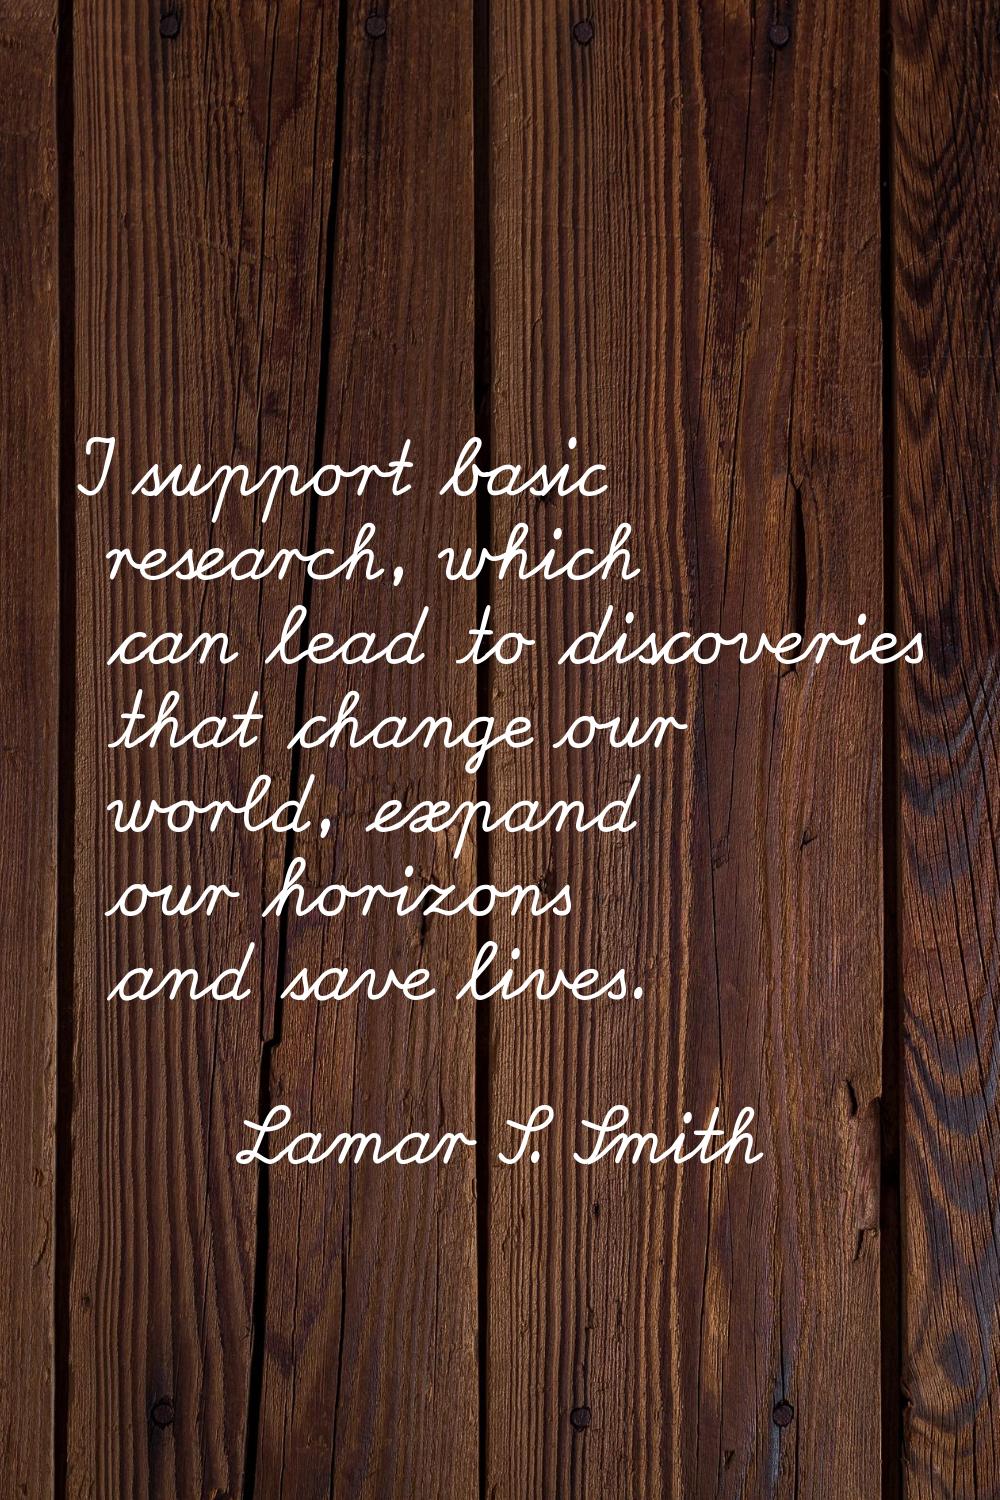 I support basic research, which can lead to discoveries that change our world, expand our horizons 